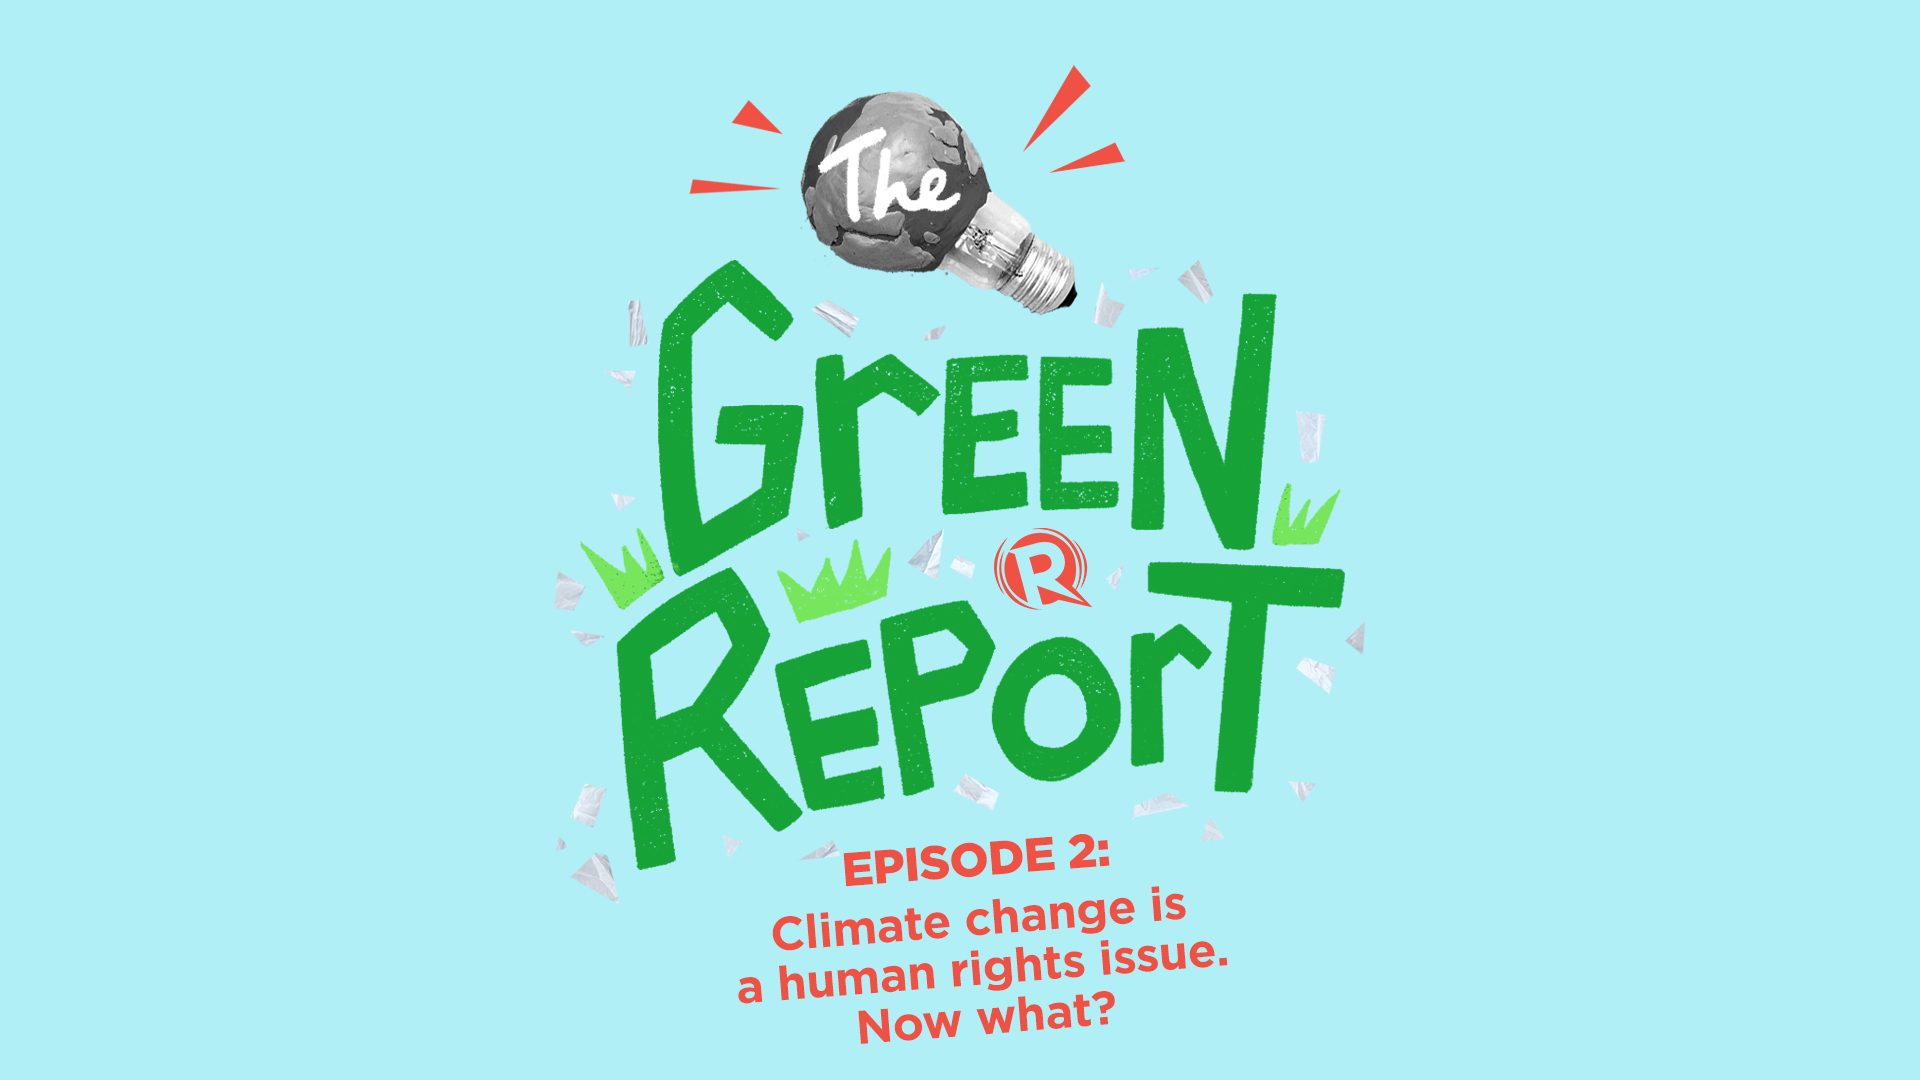 [PODCAST] The Green Report: Climate change is a human rights issue. Now what?